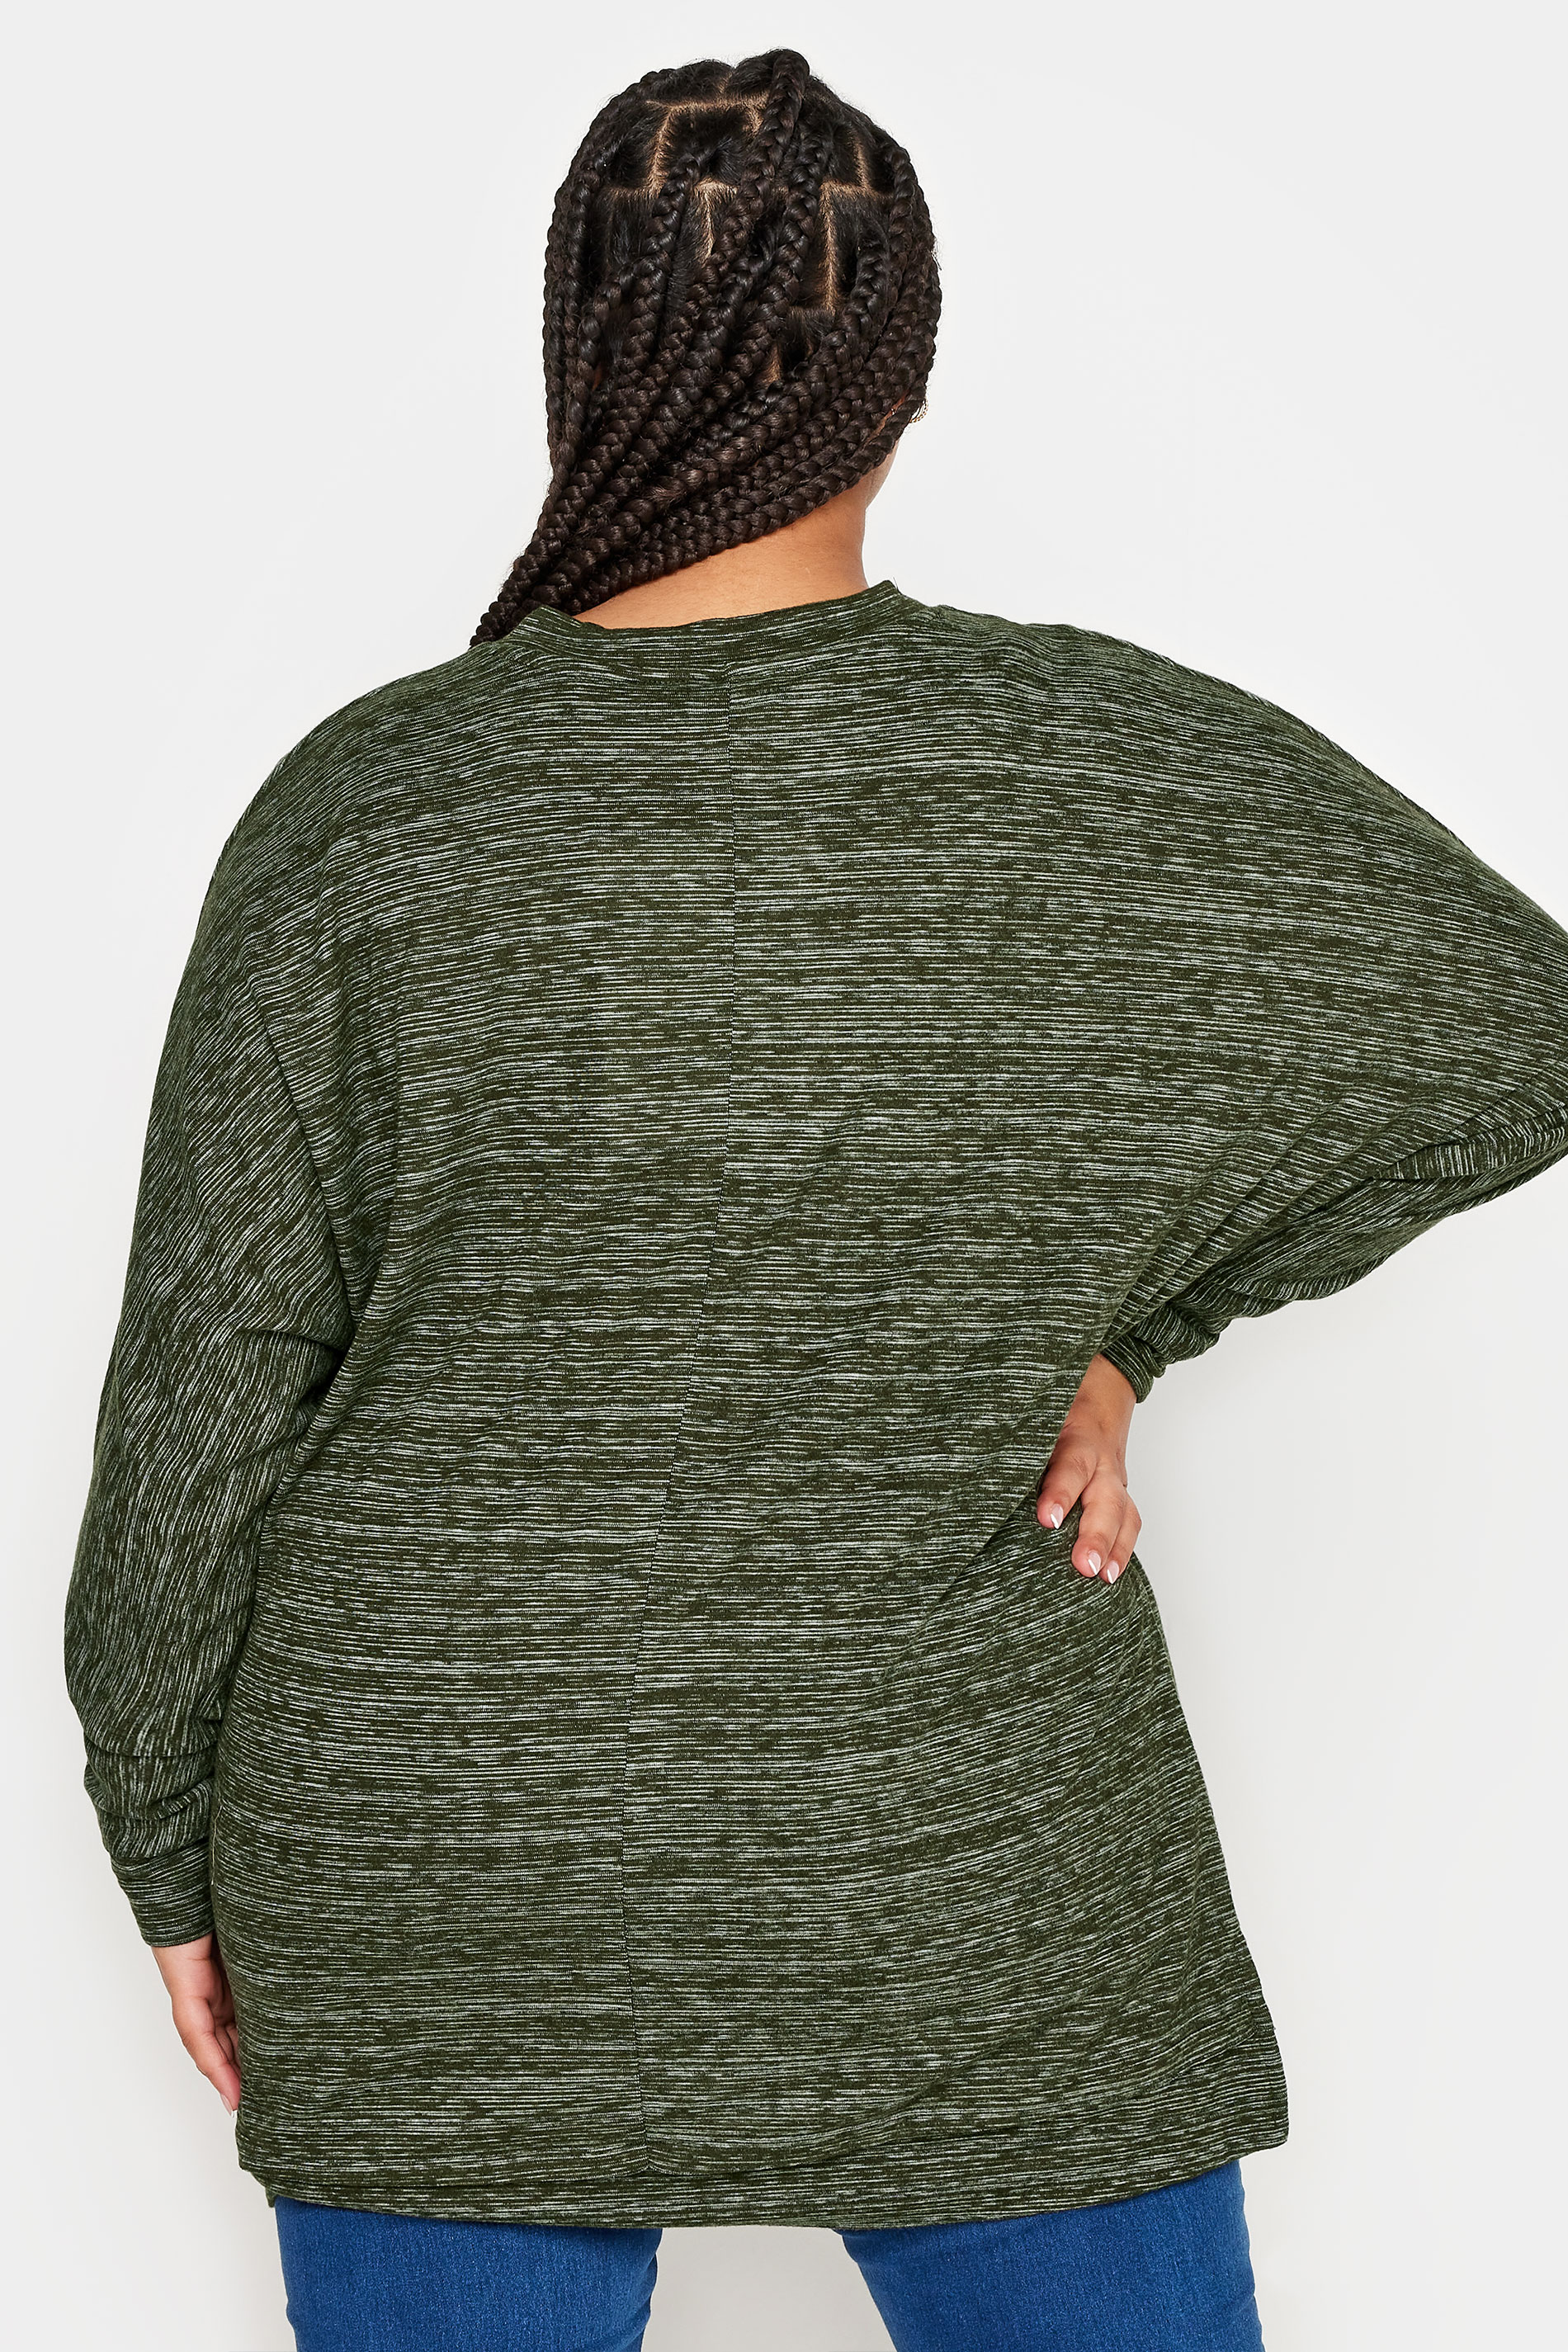 YOURS LUXURY Plus Size Grey Soft Touch Jumper | Yours Clothing 3